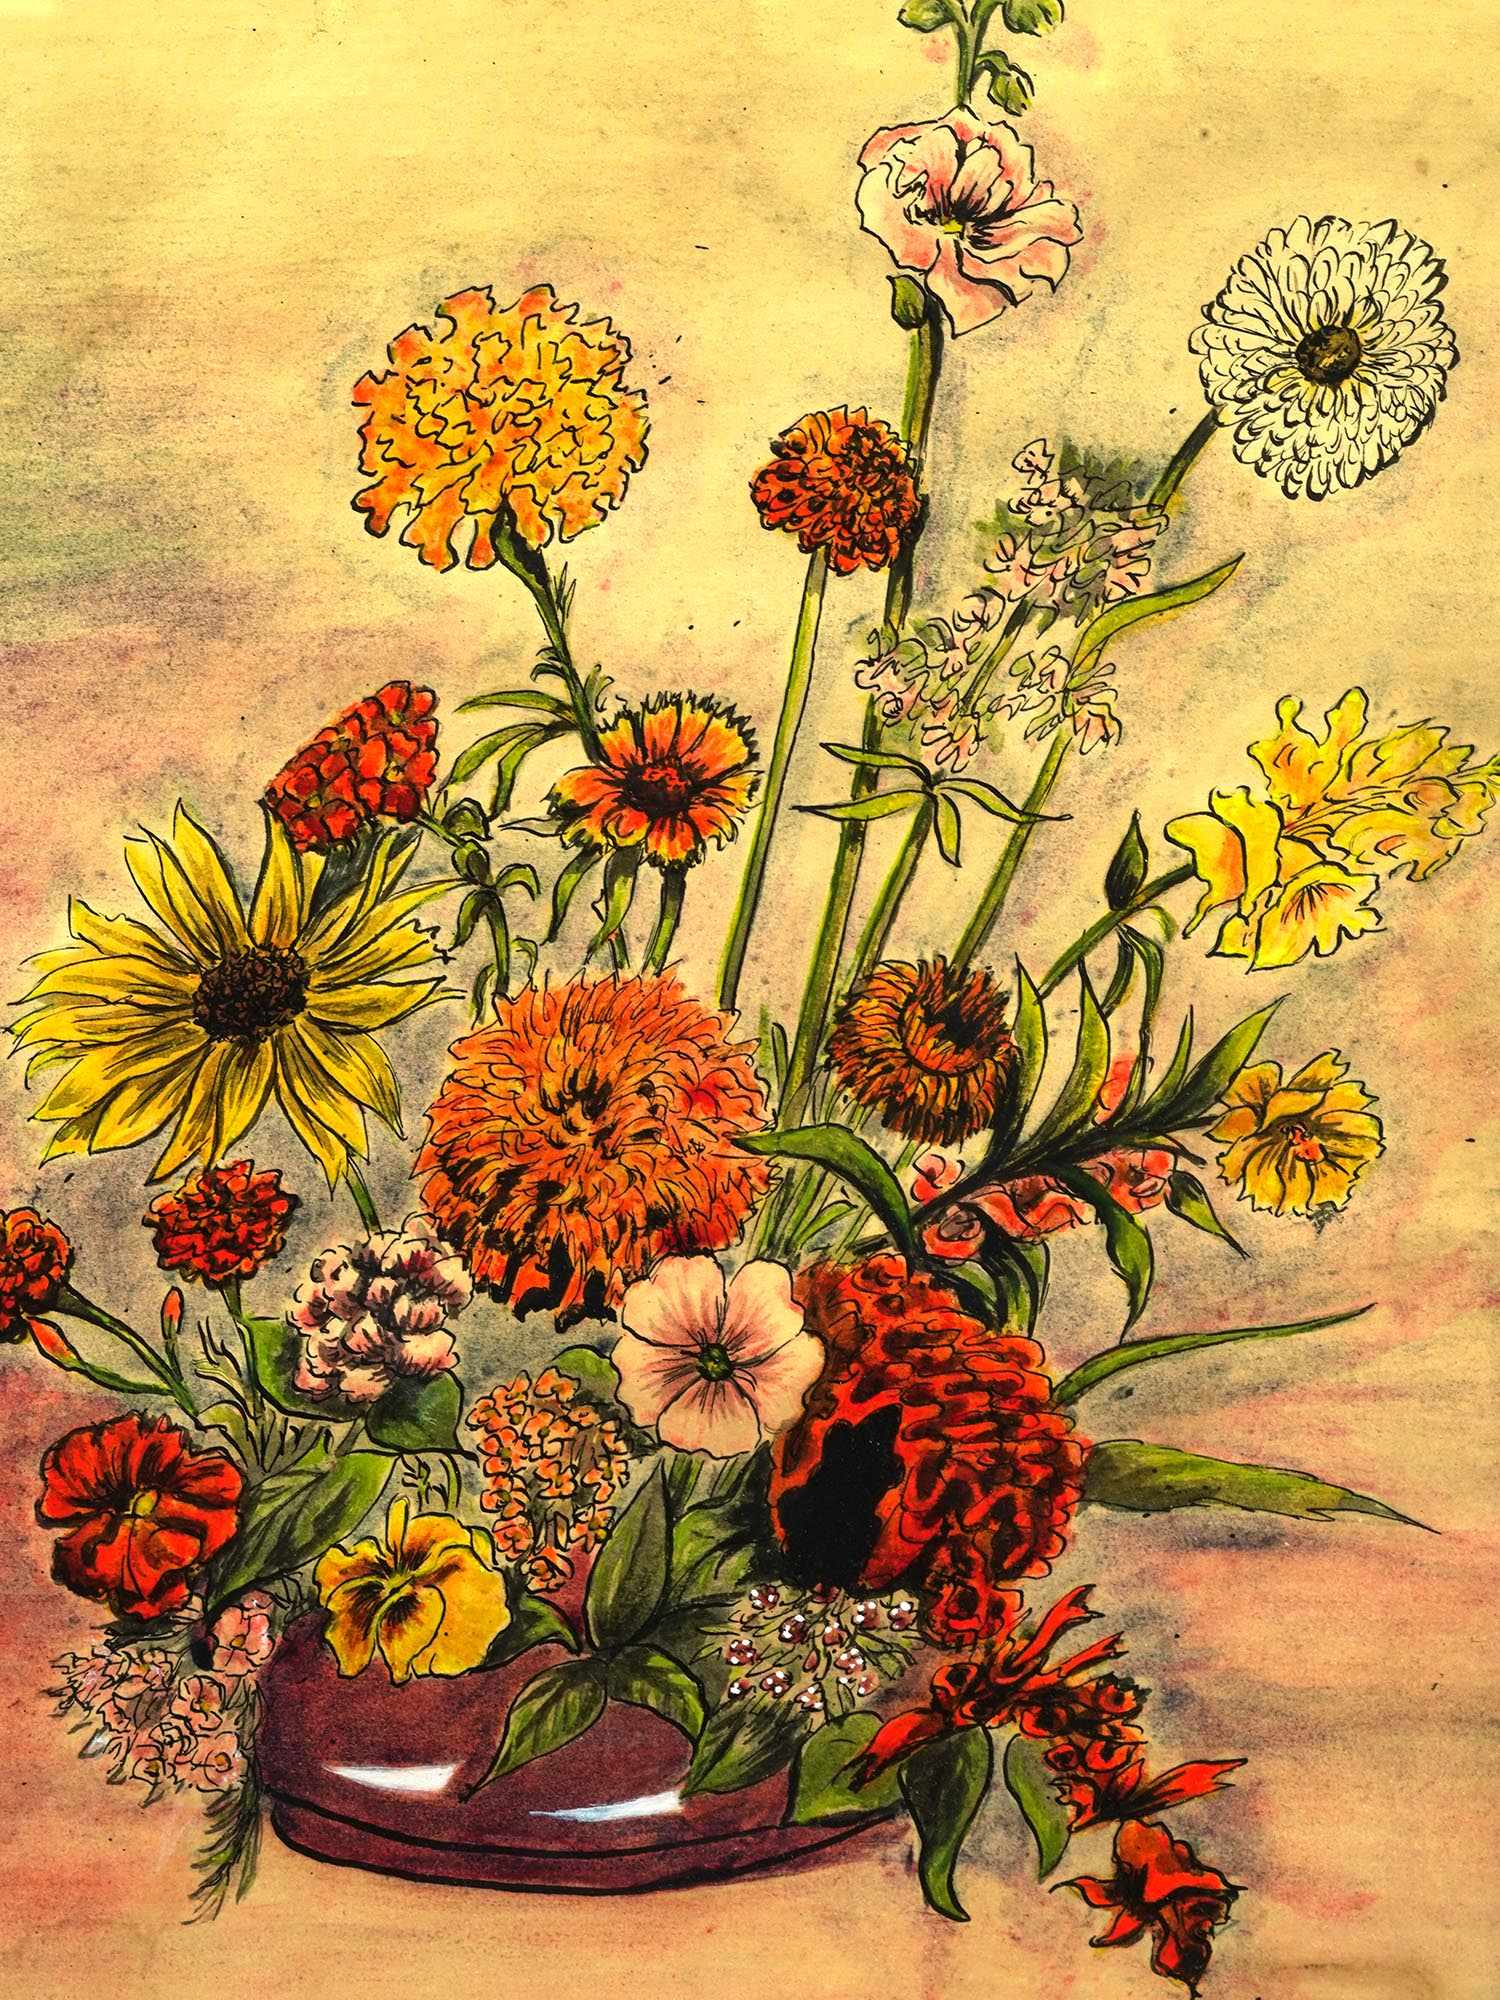 MIXED MEDIA PAINTING OF FLOWERS DAISY H MARTIN 67 PIC-1